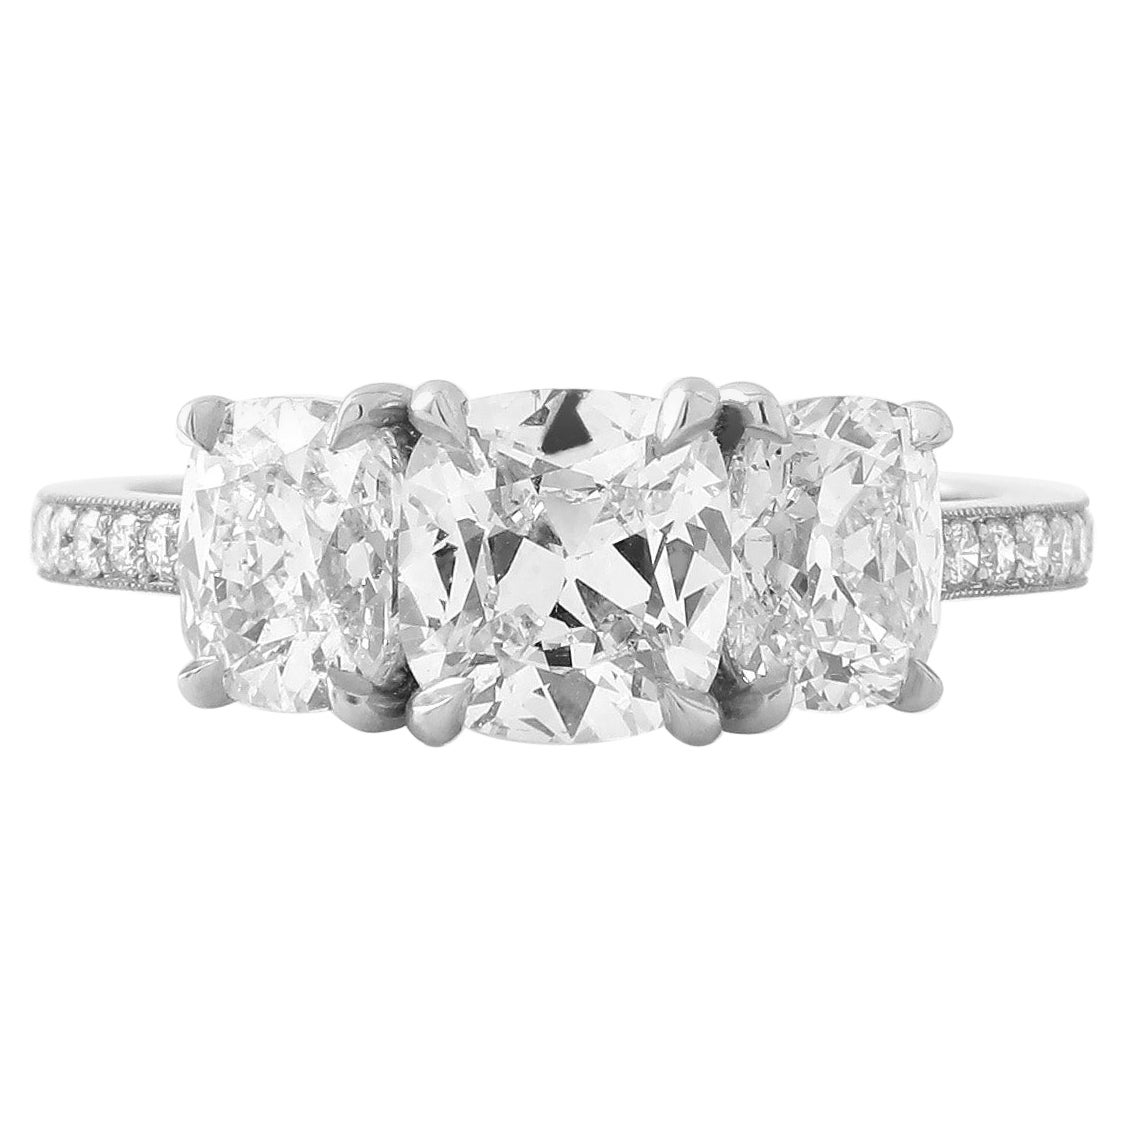 GIA Antique-Cut Diamond Cushion Three Stone Ring with 1.06 D VVS1 Center For Sale